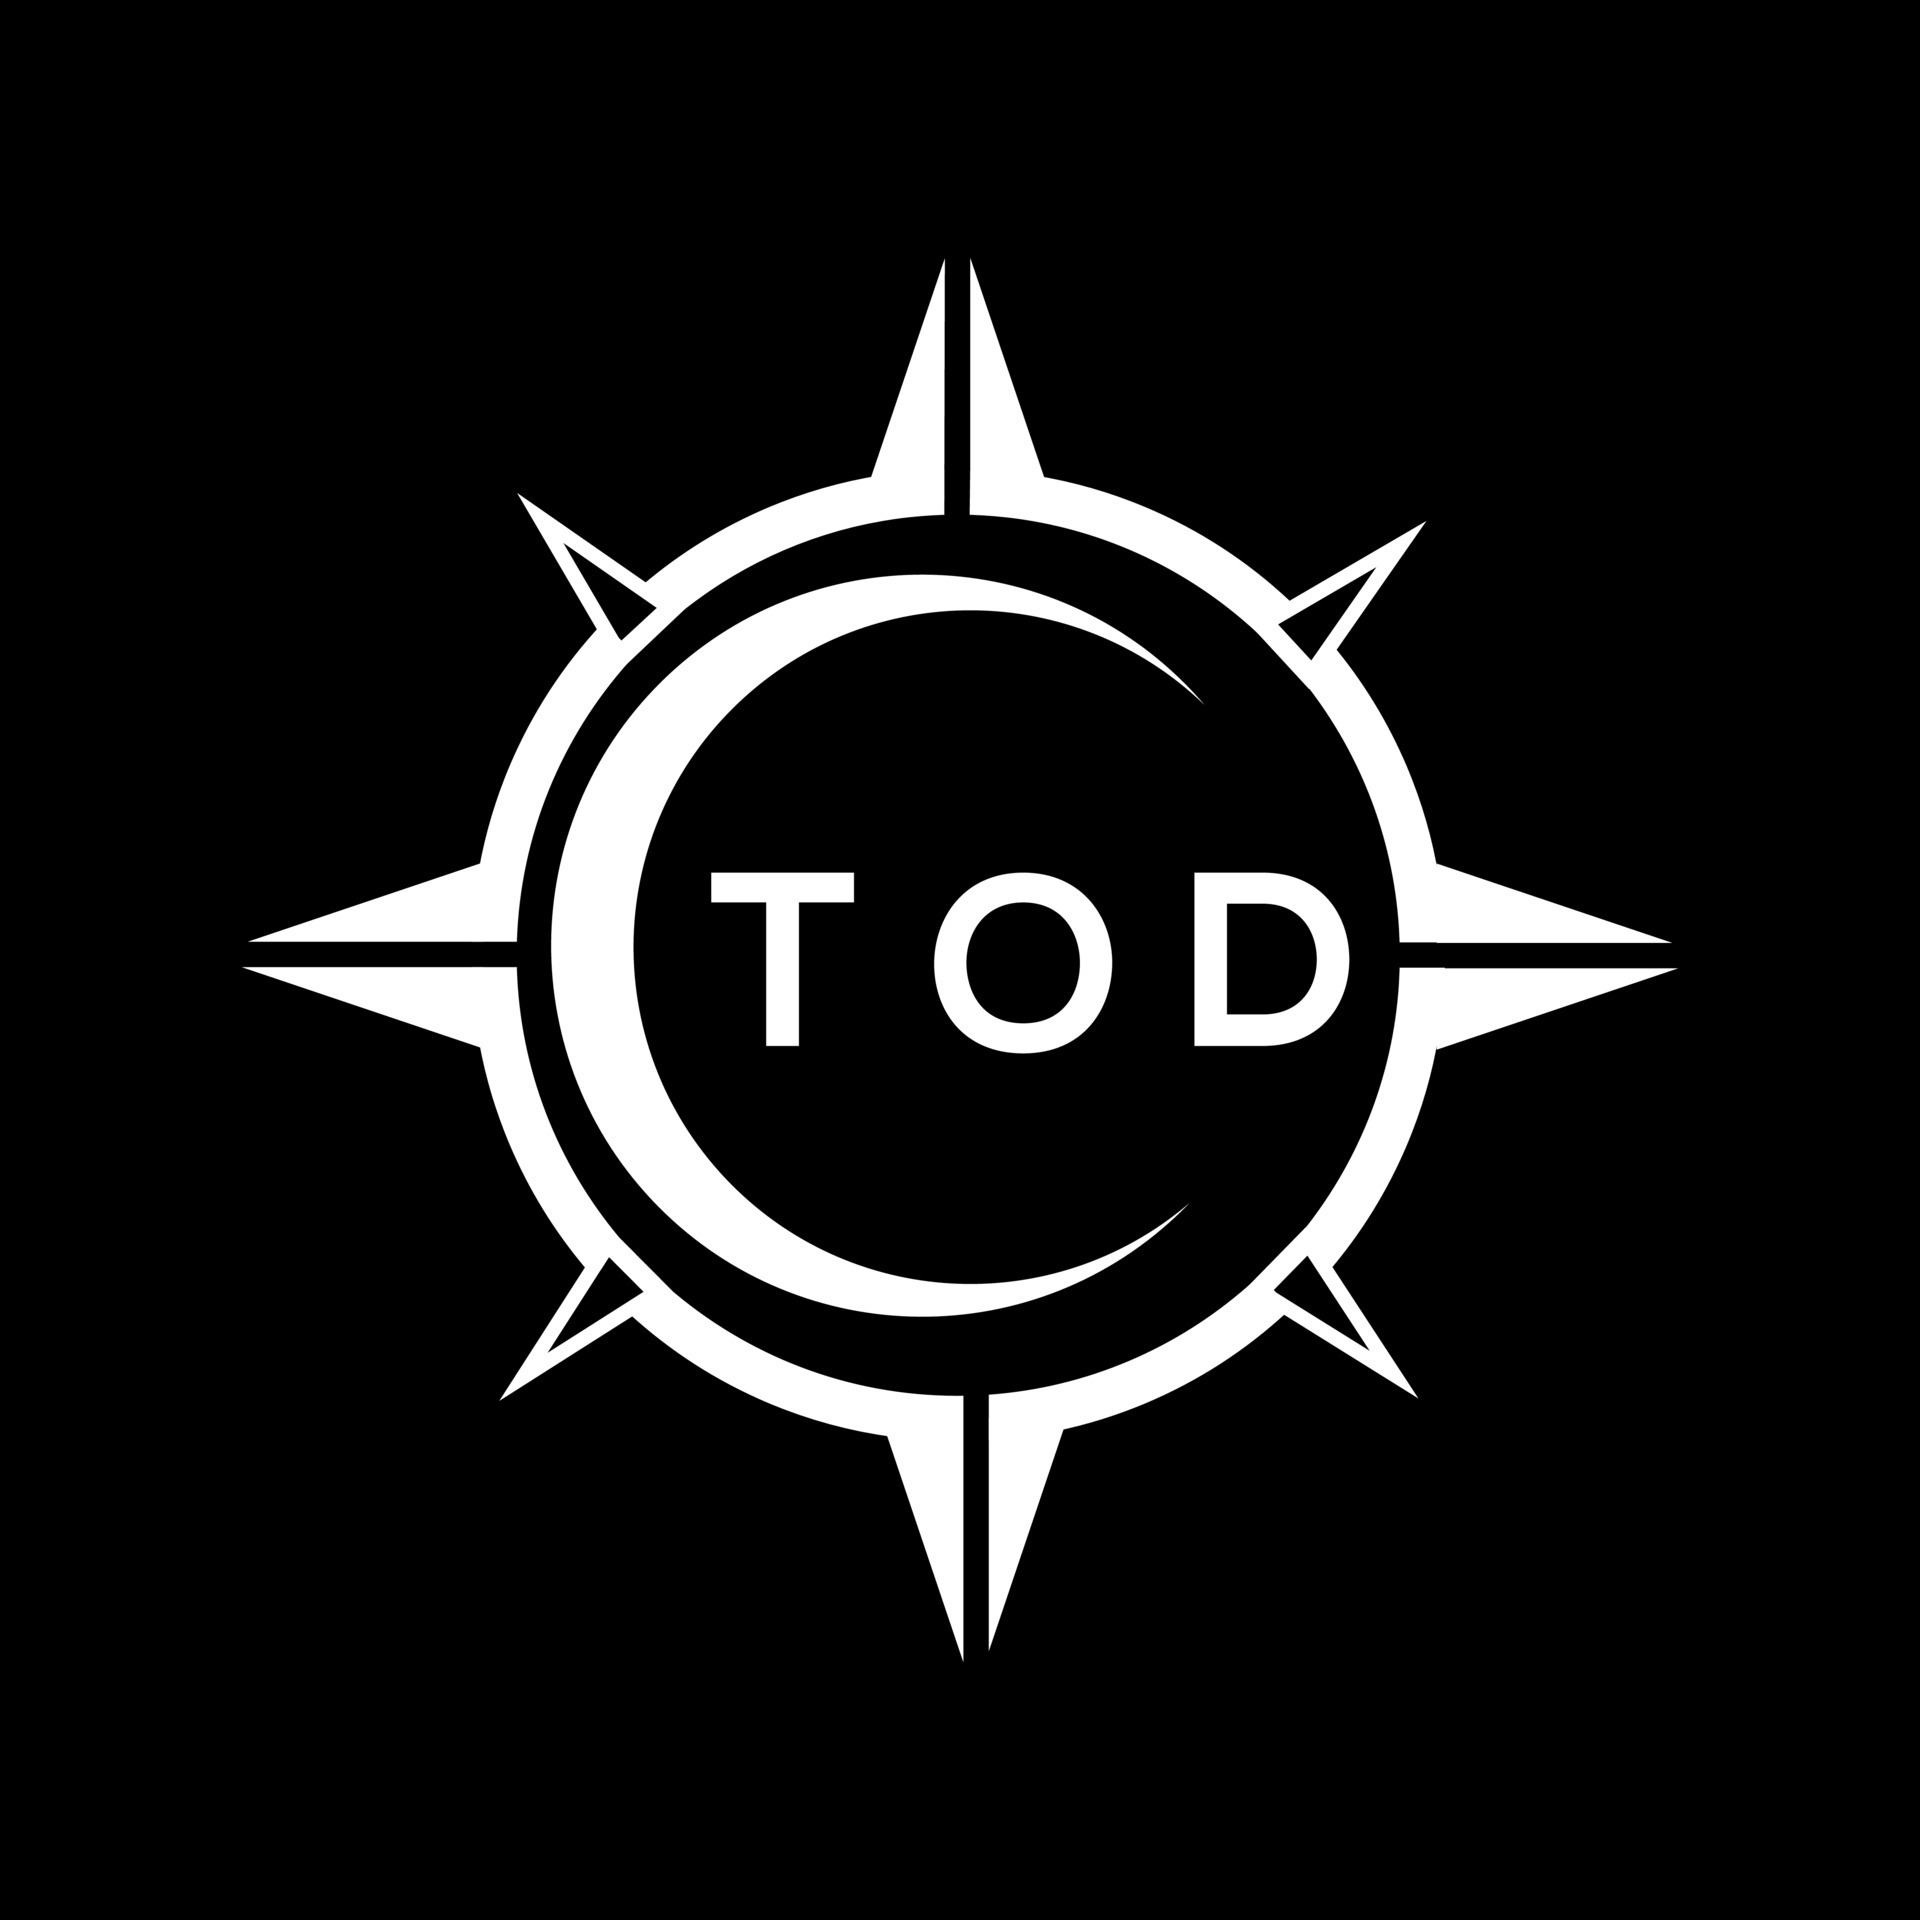 TOD abstract technology logo design on Black background. TOD